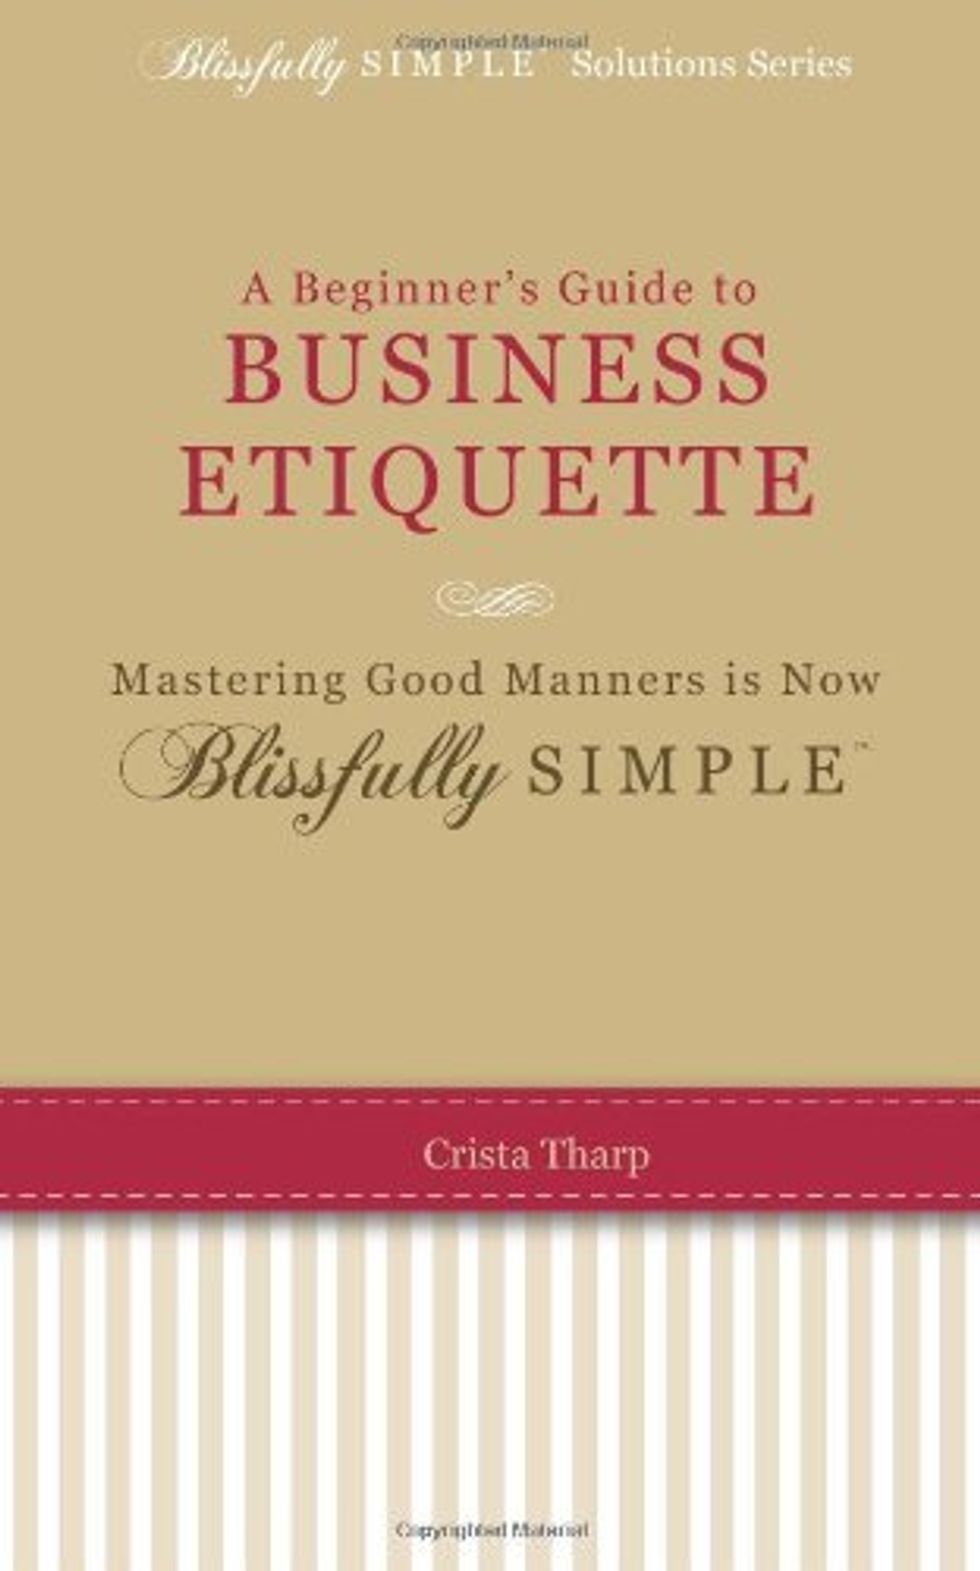 A Beginner’s Guide To Business Etiquette: Mastering Good Manners Is Now Blissfully Simple